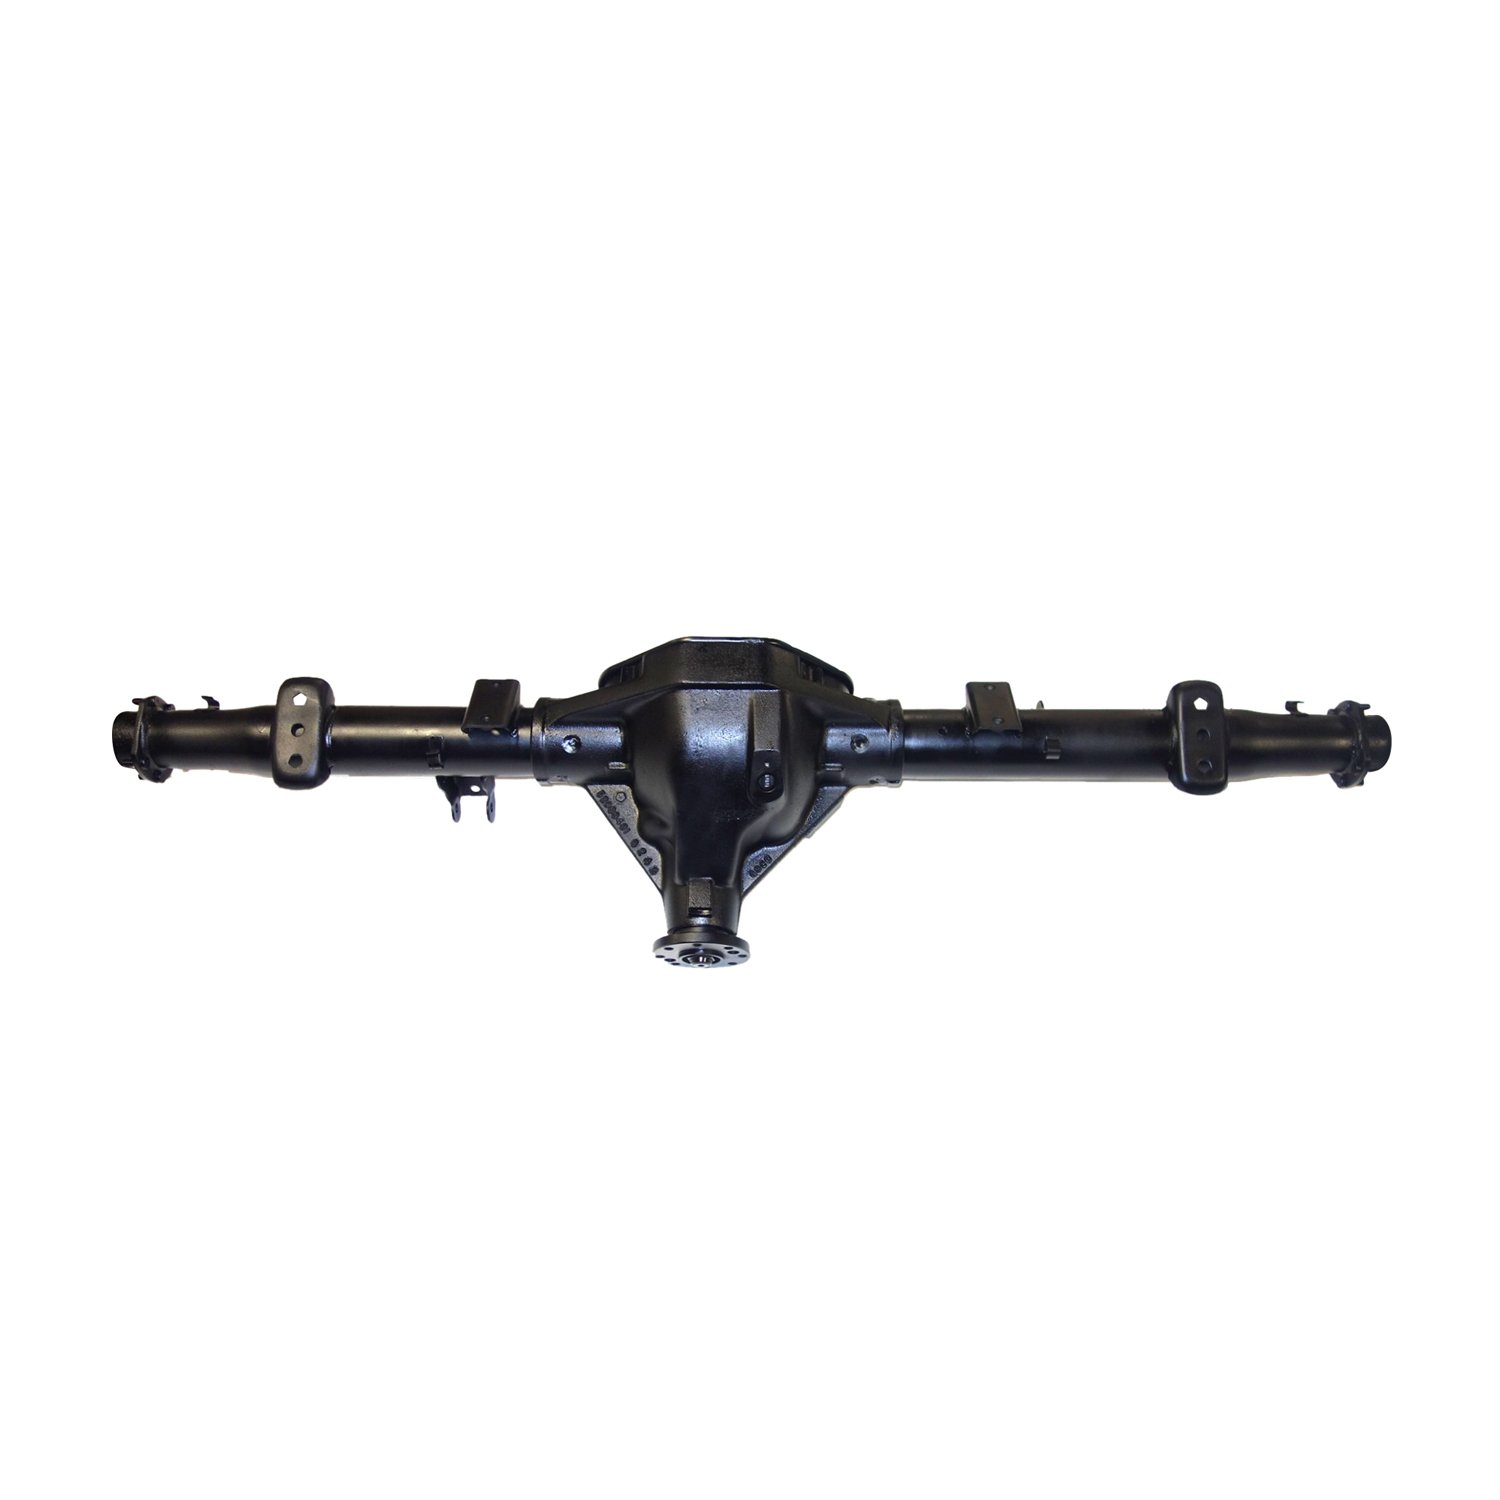 Remanufactured Axle Assy Chy 9.25" 04-05 Durango 3.55 , 4x4 w/ Traction Control, Posi LSD